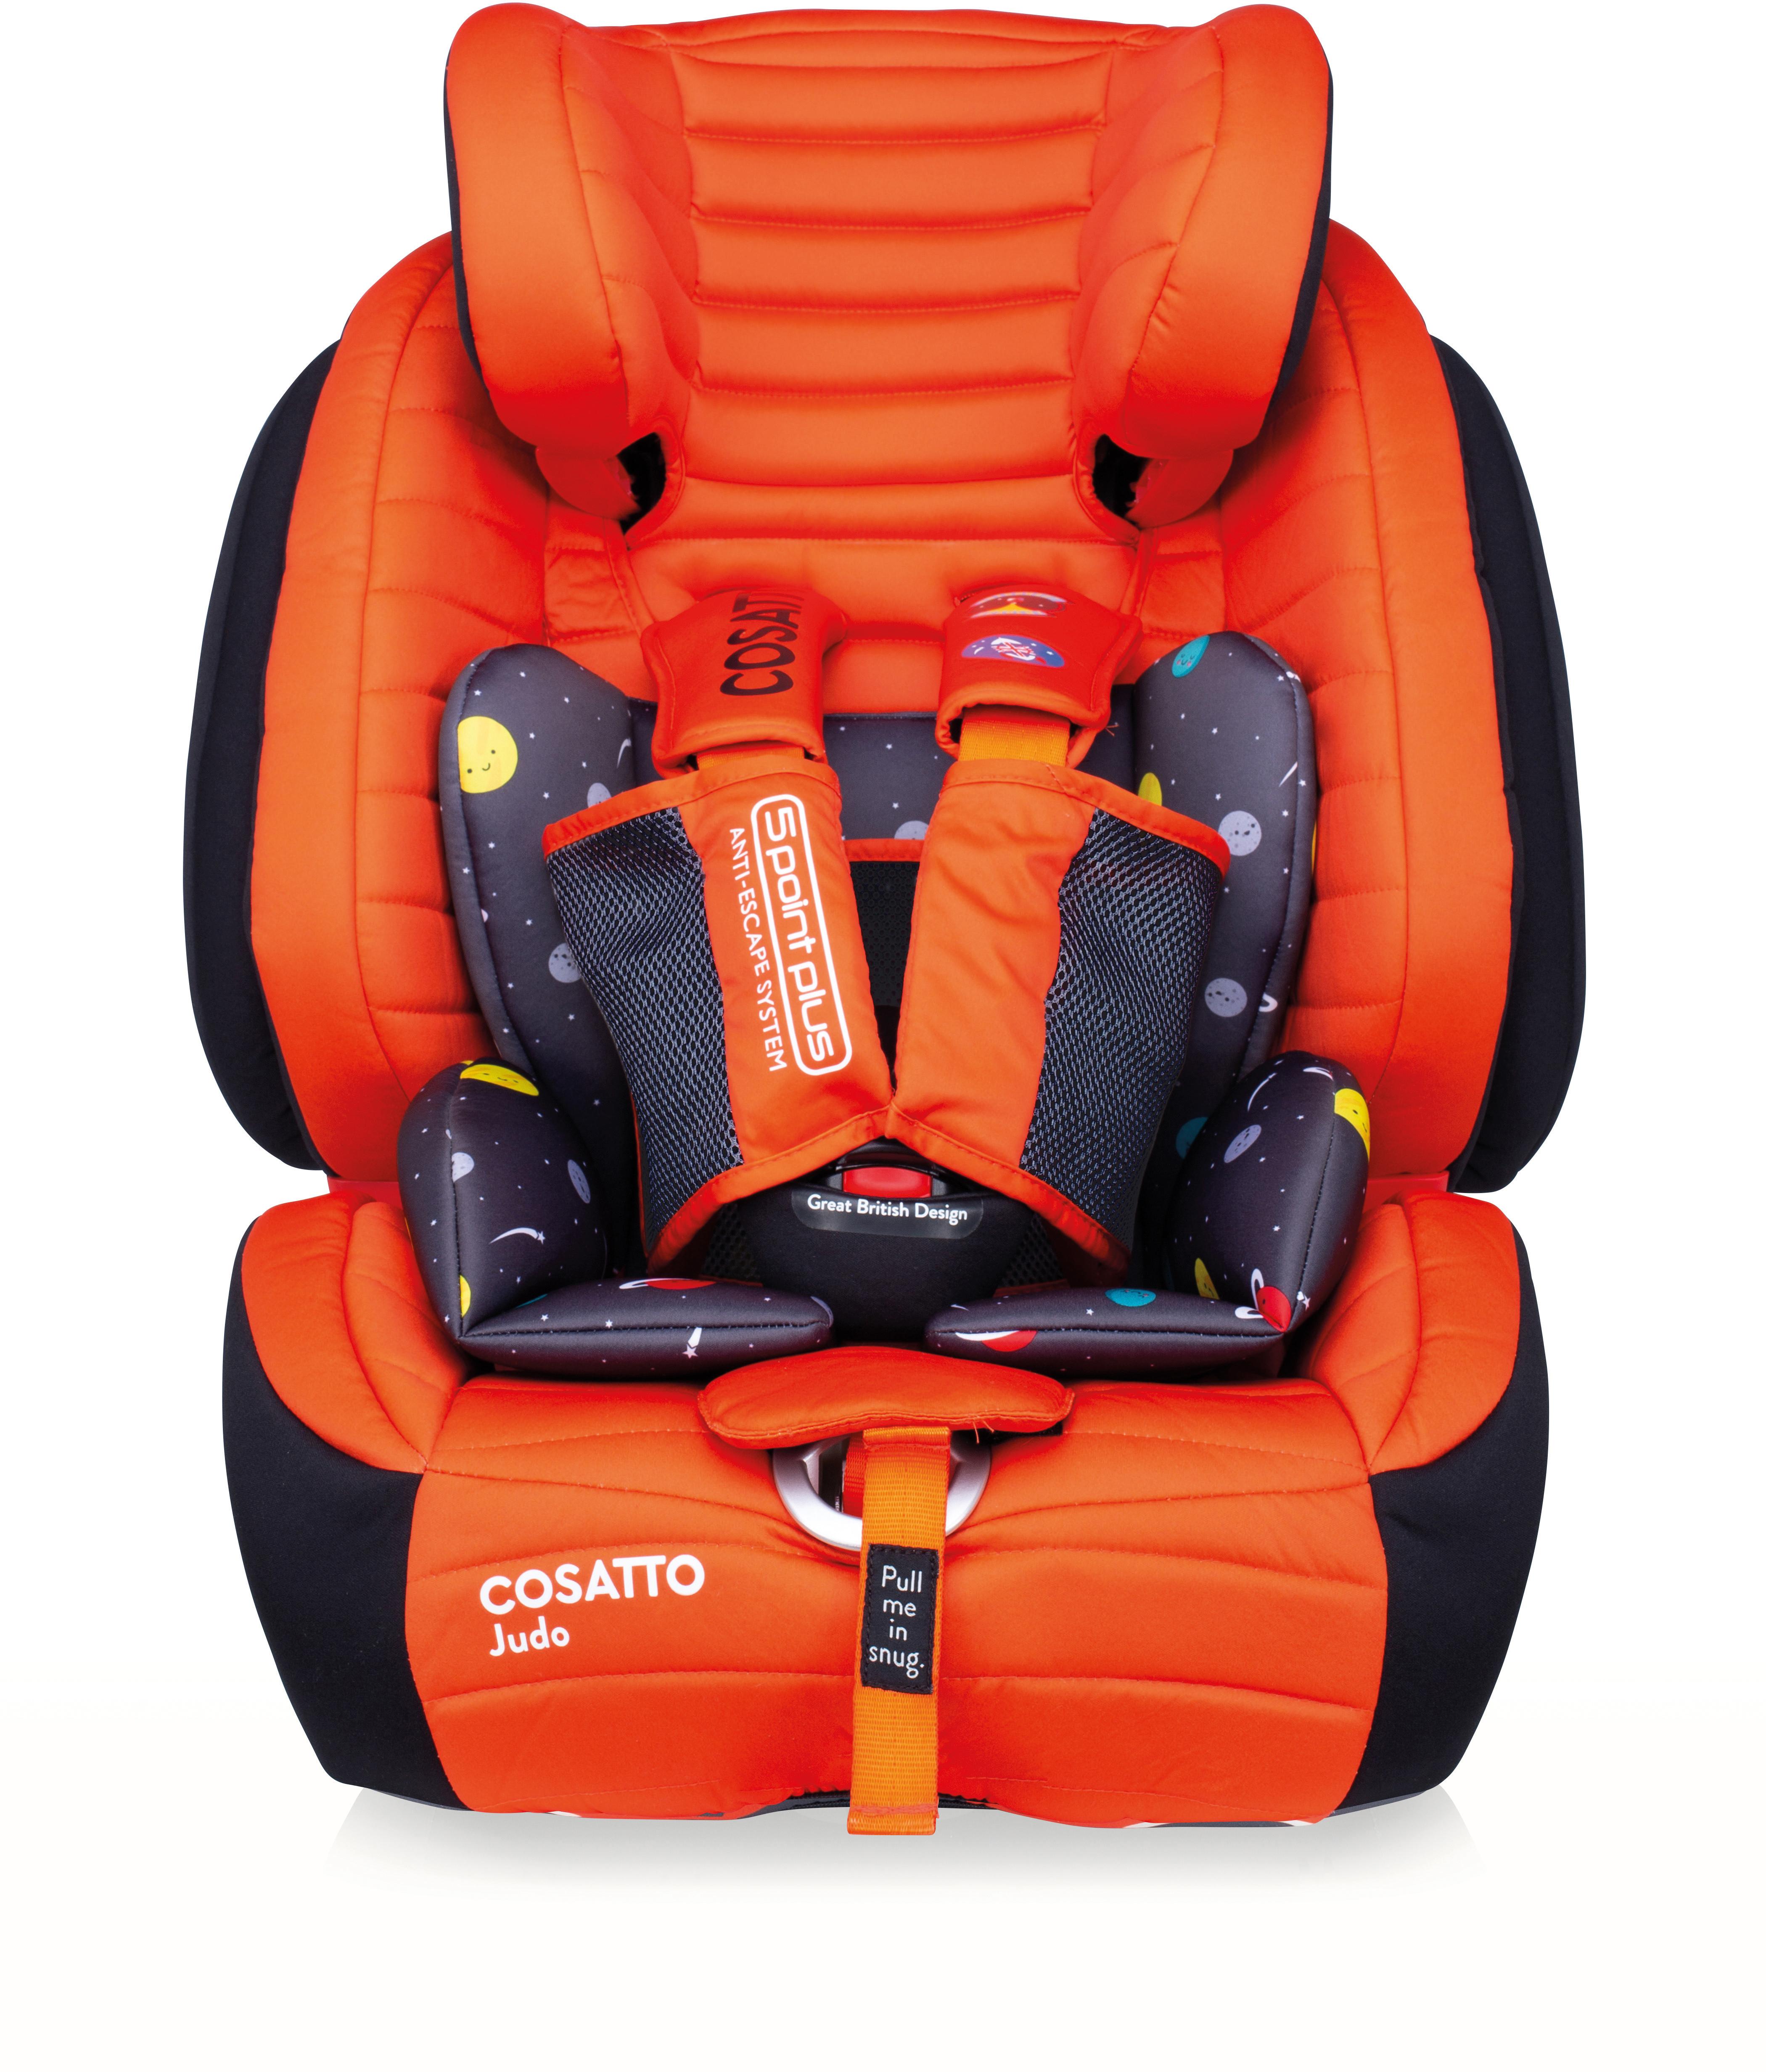 Cosatto Judo Group 1/2/3 Isofix Car Seat - Spaceman